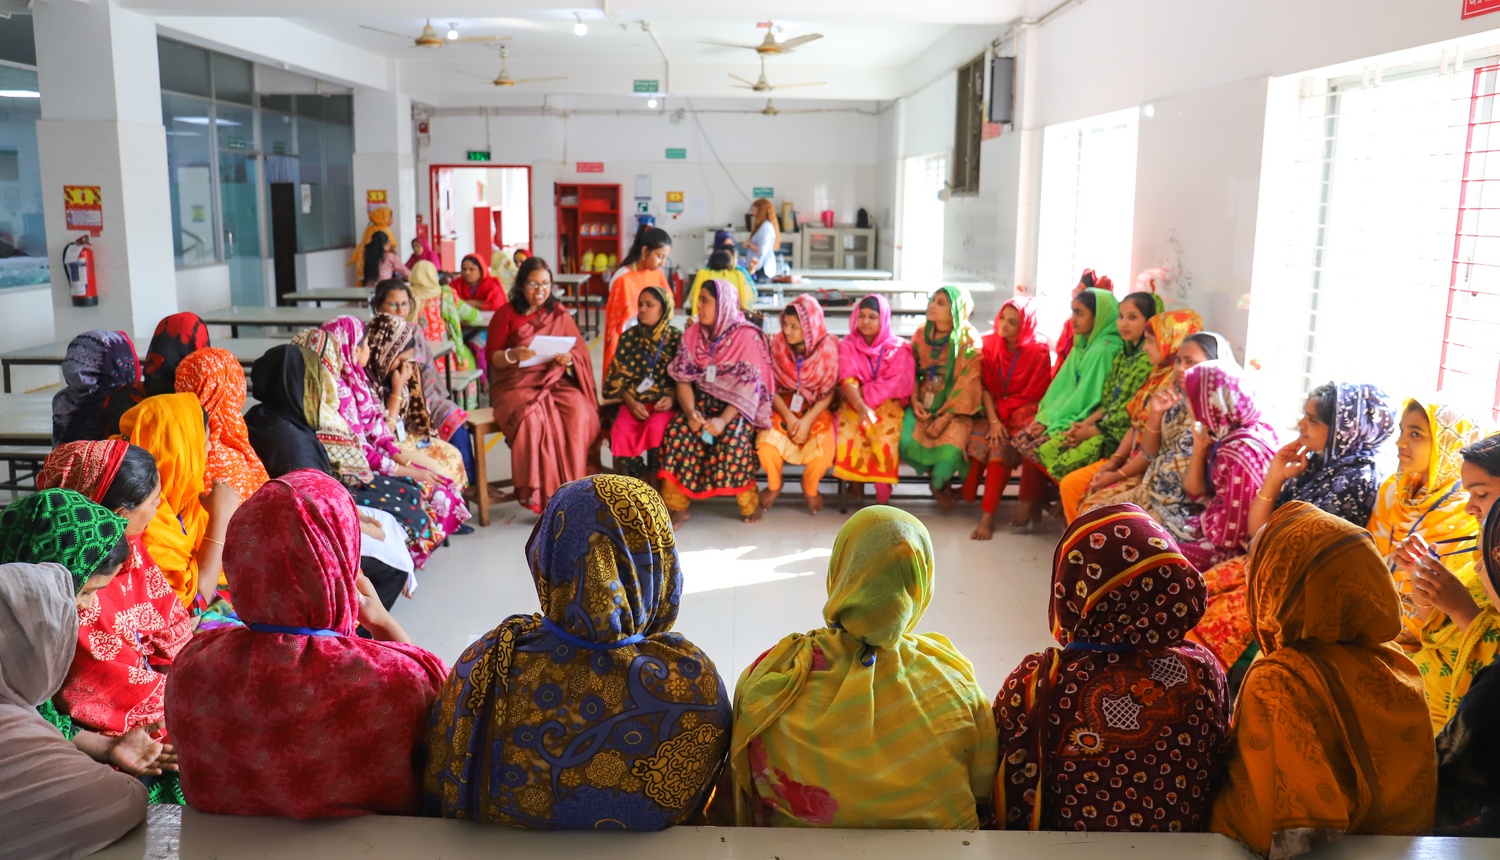 Reemi conducting Menstrual Hygiene Education sessions inside a garment factory to end global period poverty.